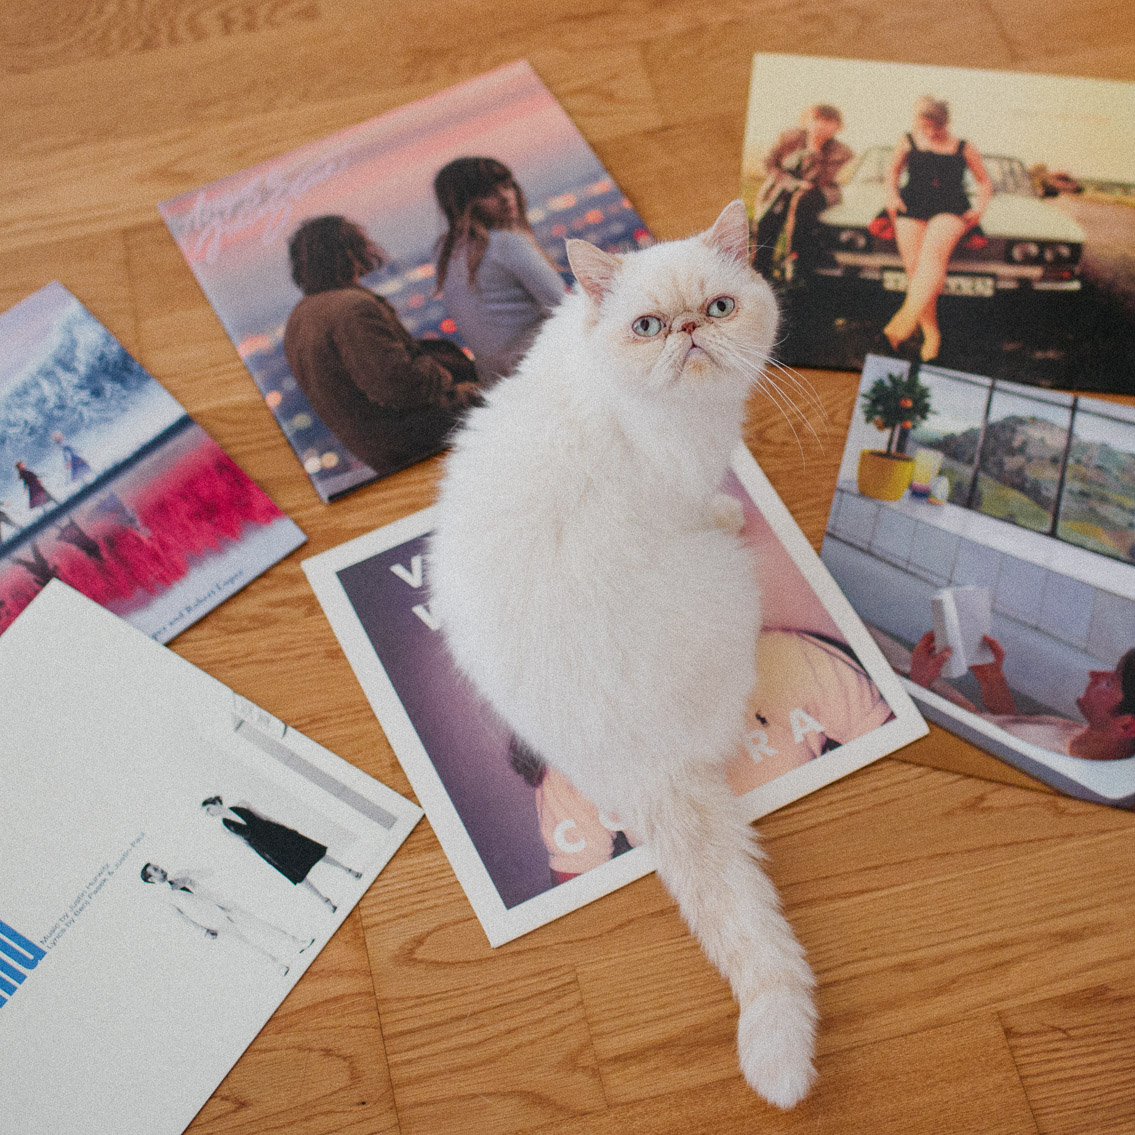 Vinyl disc collection - The cat, you and us